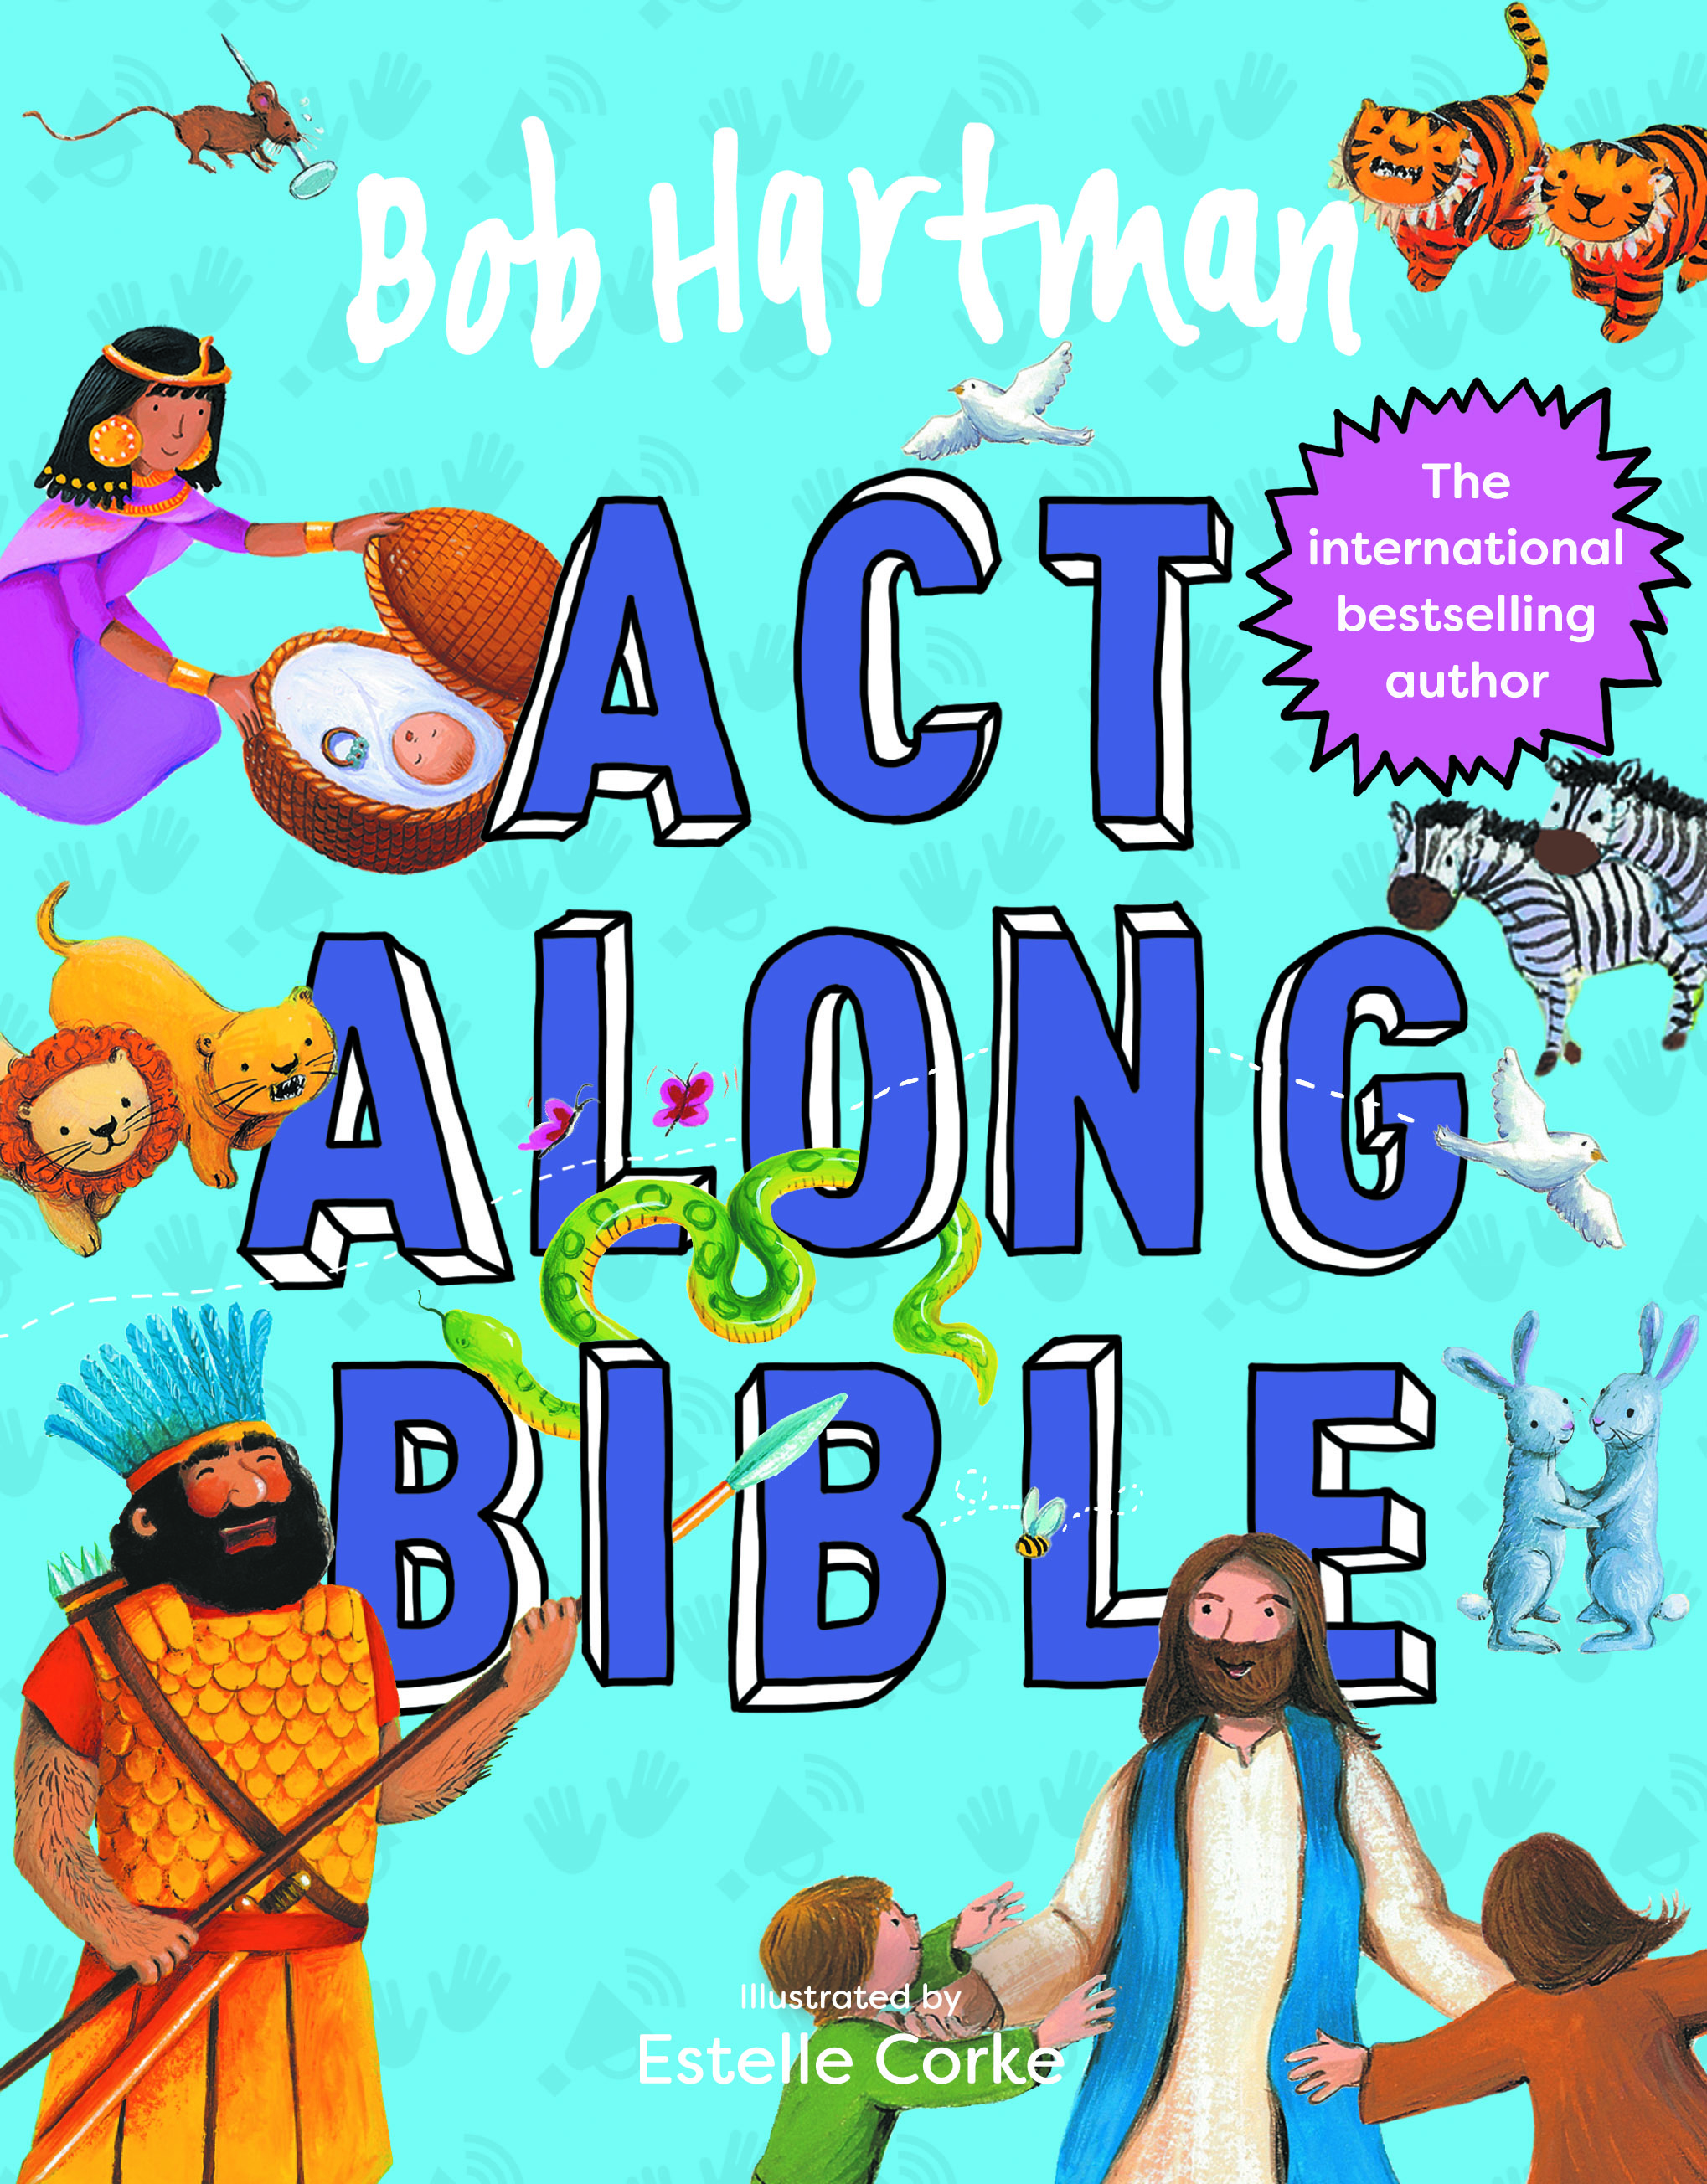 Big Book of Bible Crafts for Kids of All Ages [Book]